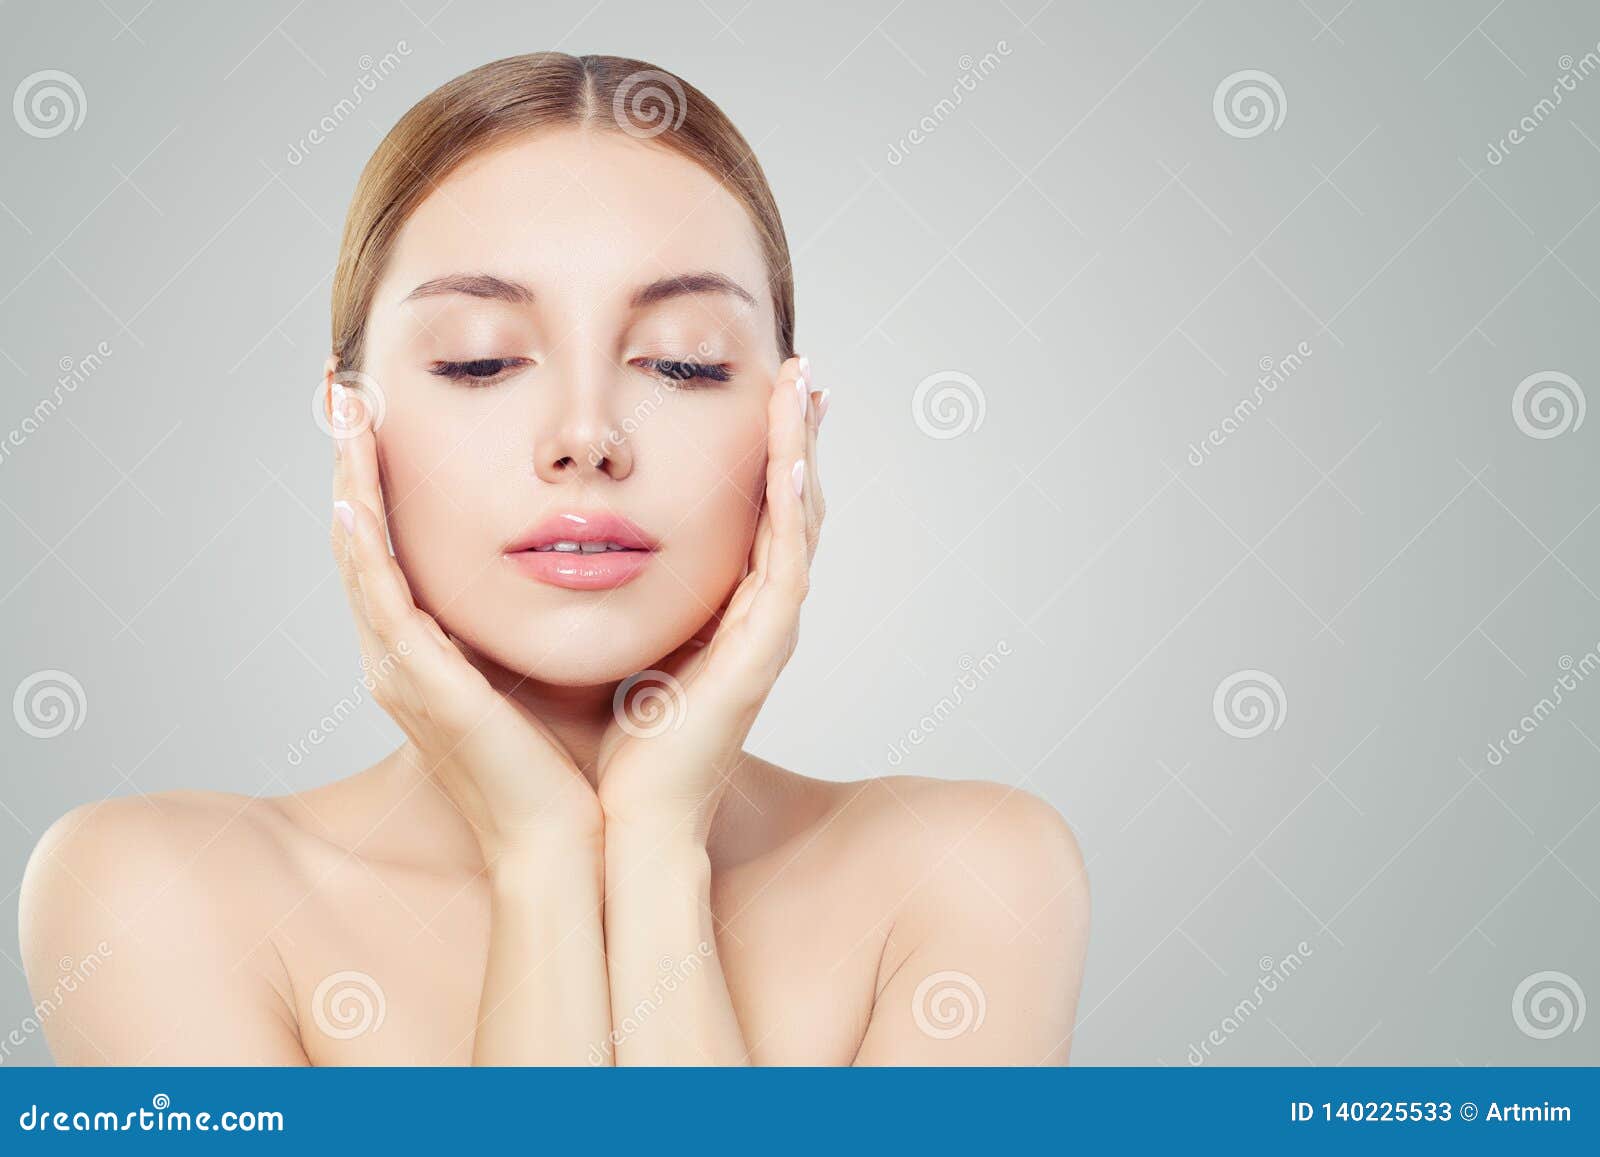 Facial for her appealing face